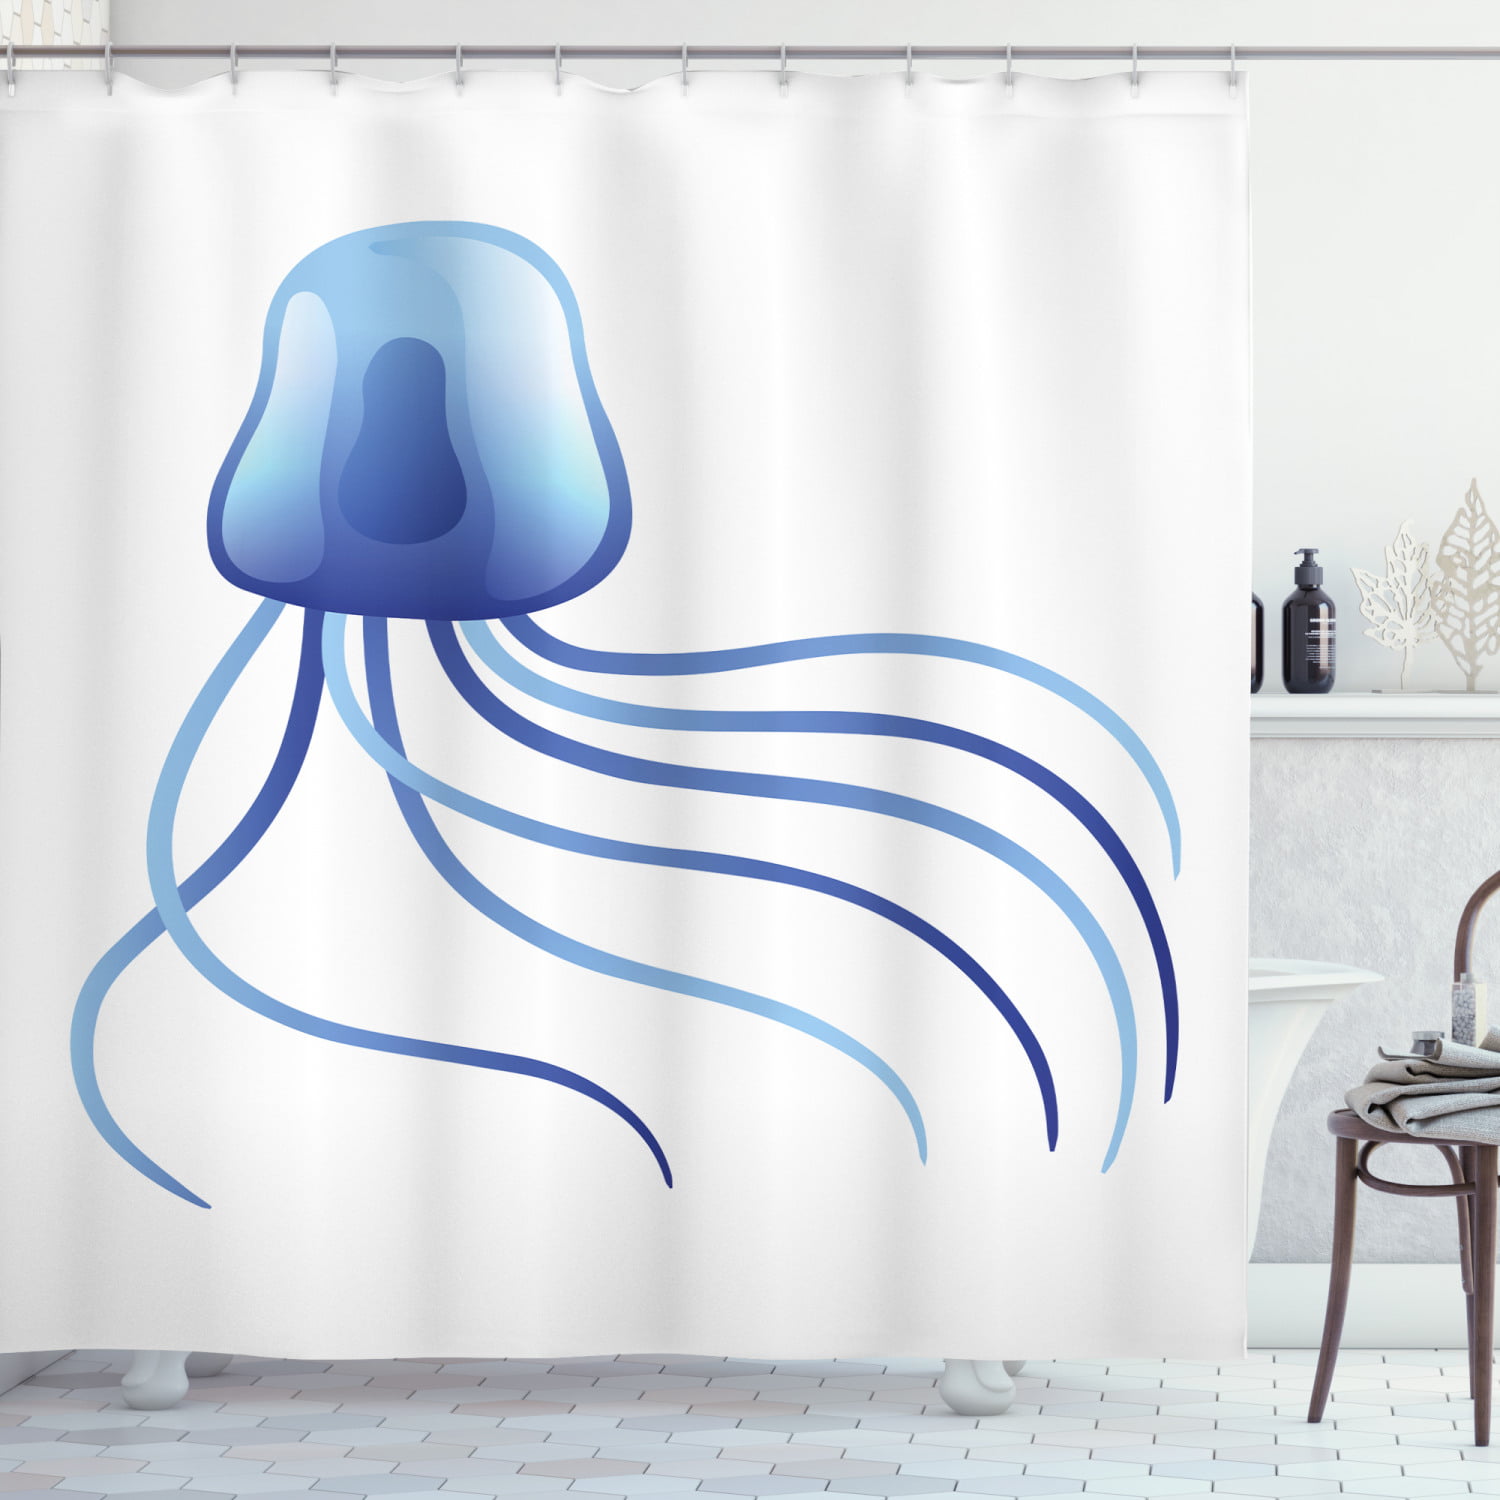 Details about   Purple Jellyfish Print Waterproof Bathroom Shower Curtain Toilet Cover Mat Se 